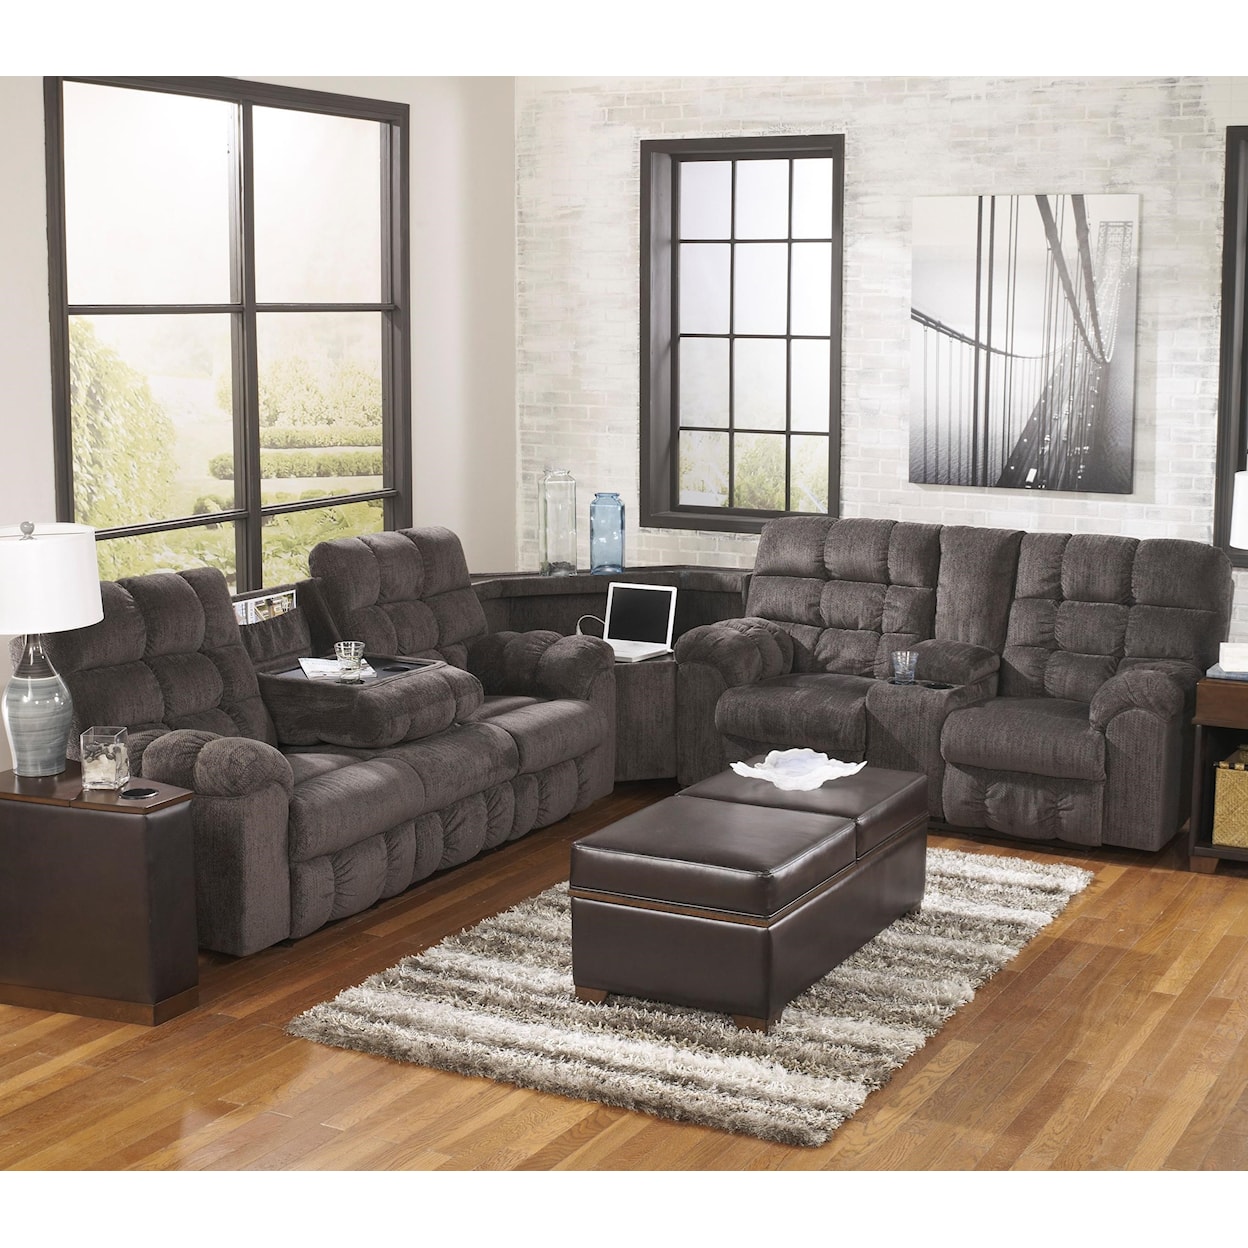 Signature Design by Ashley Furniture Acieona Reclining Sectional with Right Side Loveseat